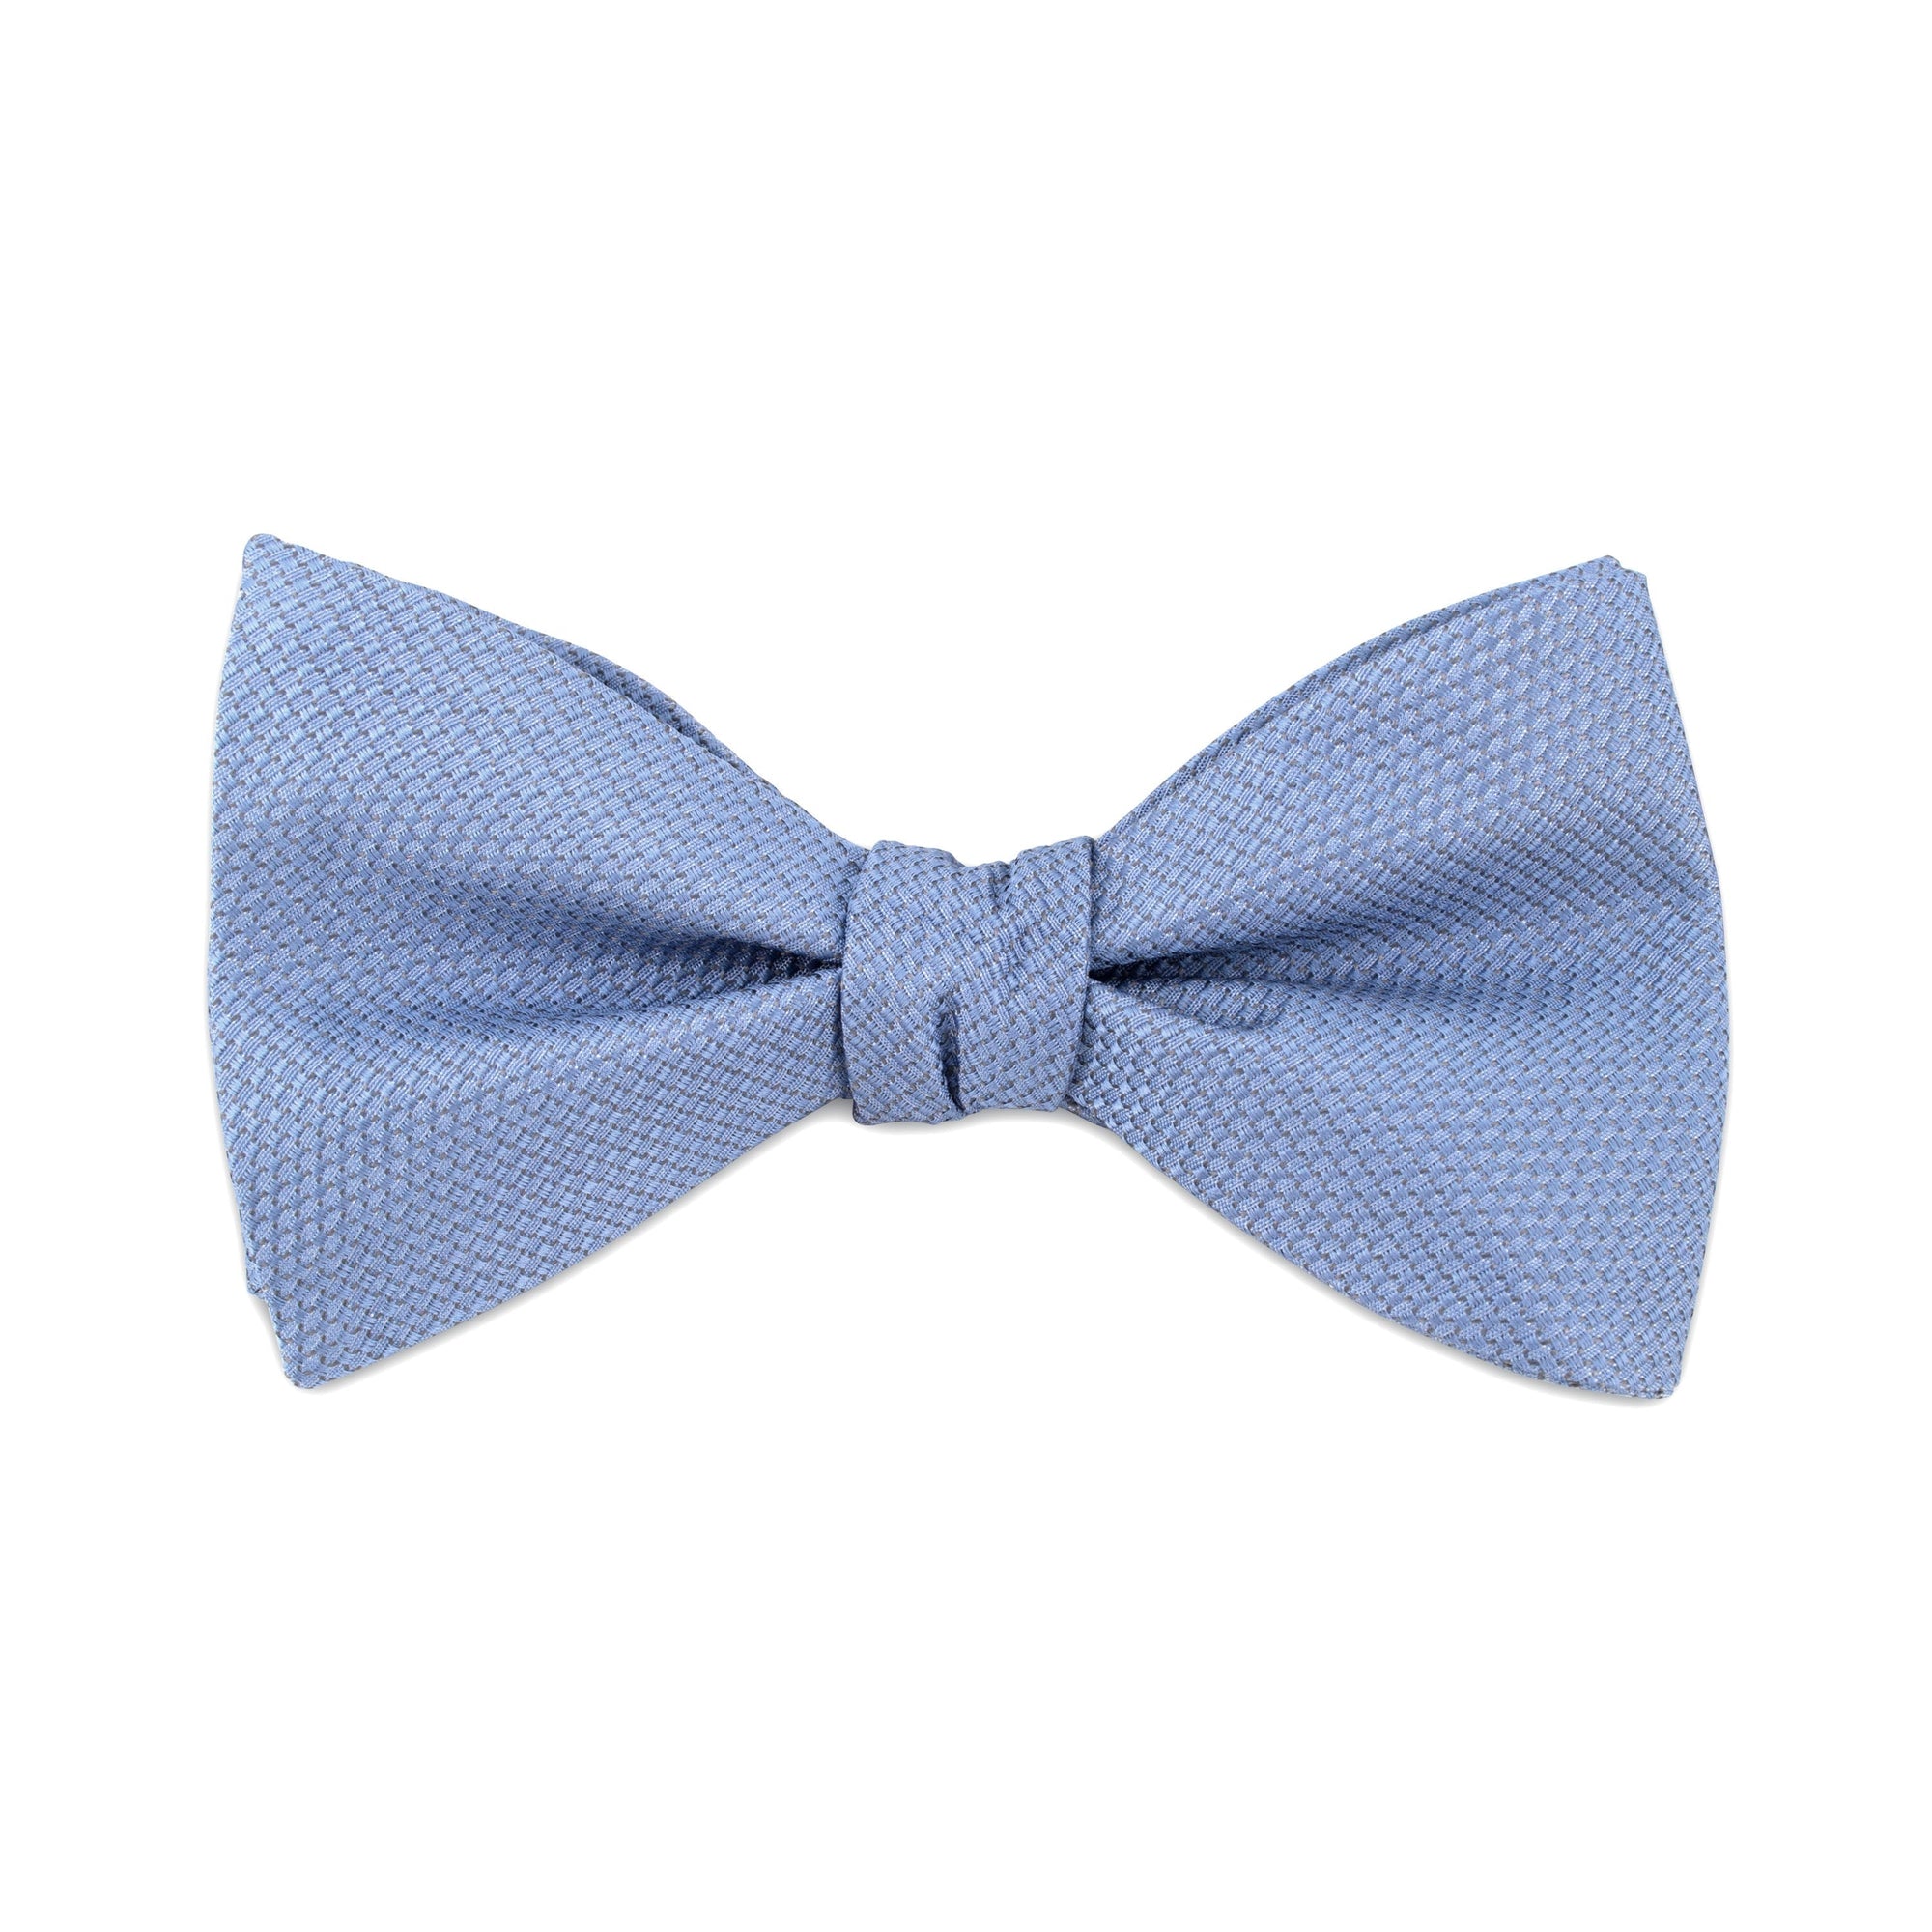 Light Sky Blue Textured Self Tie and Ready Made Bow Tie-Bow Ties-A.Azthom-Cufflinks.com.sg